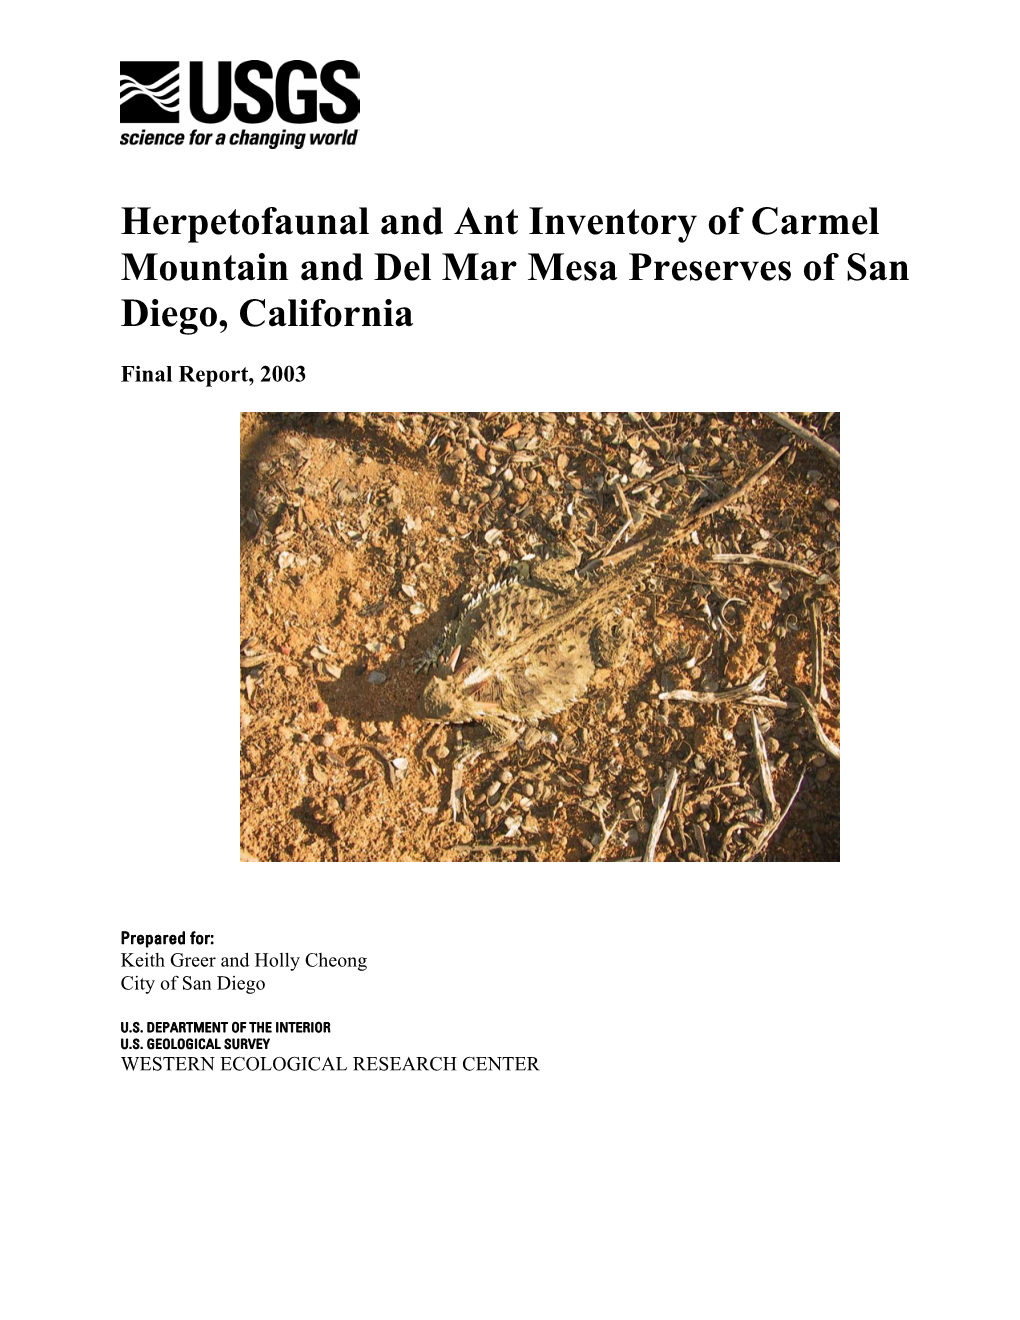 Herpetofaunal and Ant Inventory of Carmel Mountain and Del Mar Mesa Preserves of San Diego, California